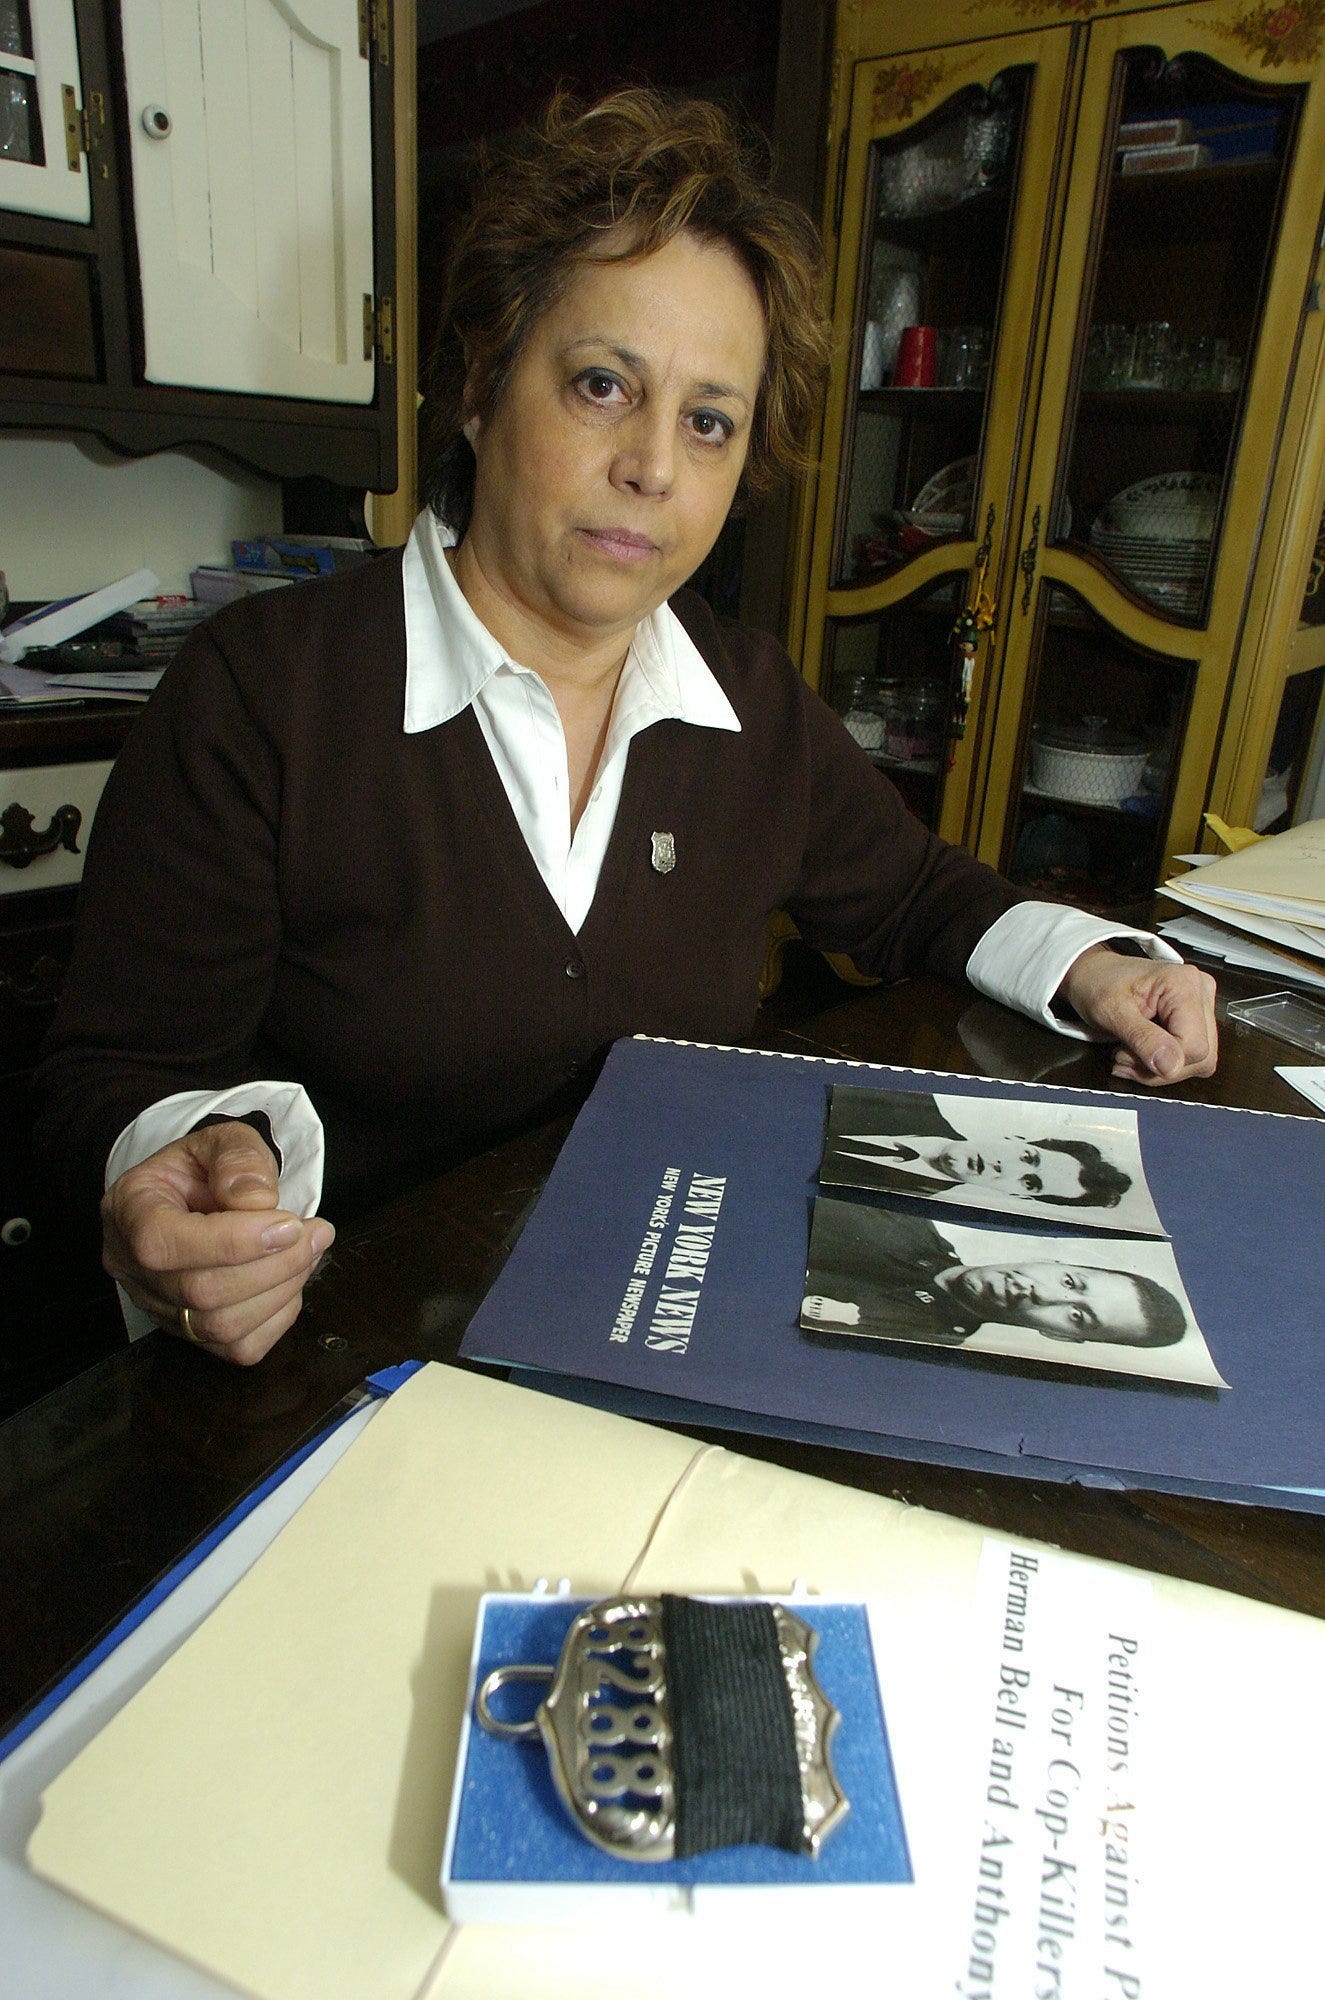 Diane Piagentini, widow of New York City police officer Joseph Piagentini, who was killed in 1971 by members of the Black Liberation Army, a violent offshoot of the Black Panthers, sits in her Deer Park, N.Y., home Thursday, Jan. 8, 2004, with photos of her husband. Piagentini is fighting the parole of her husband's killers.